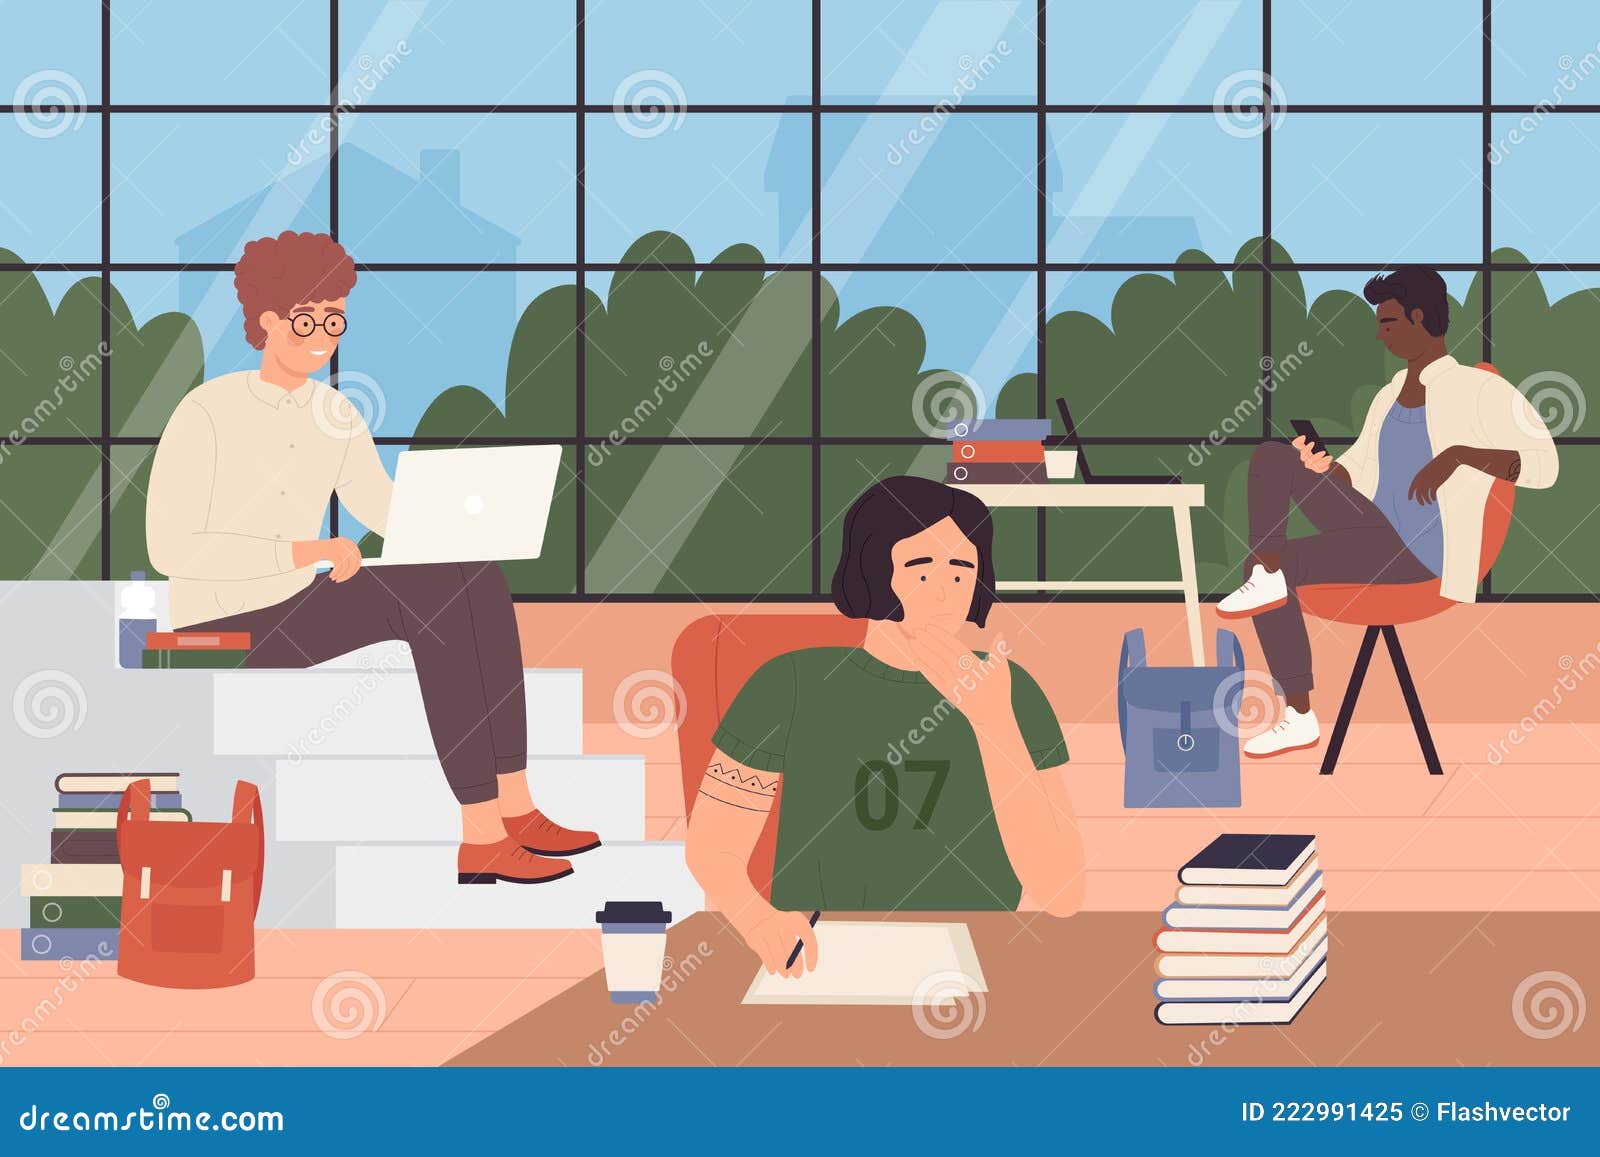 Student People Study in Modern Open Space Hall Interior of Library, College  or University Stock Vector - Illustration of cartoon, background: 222991425